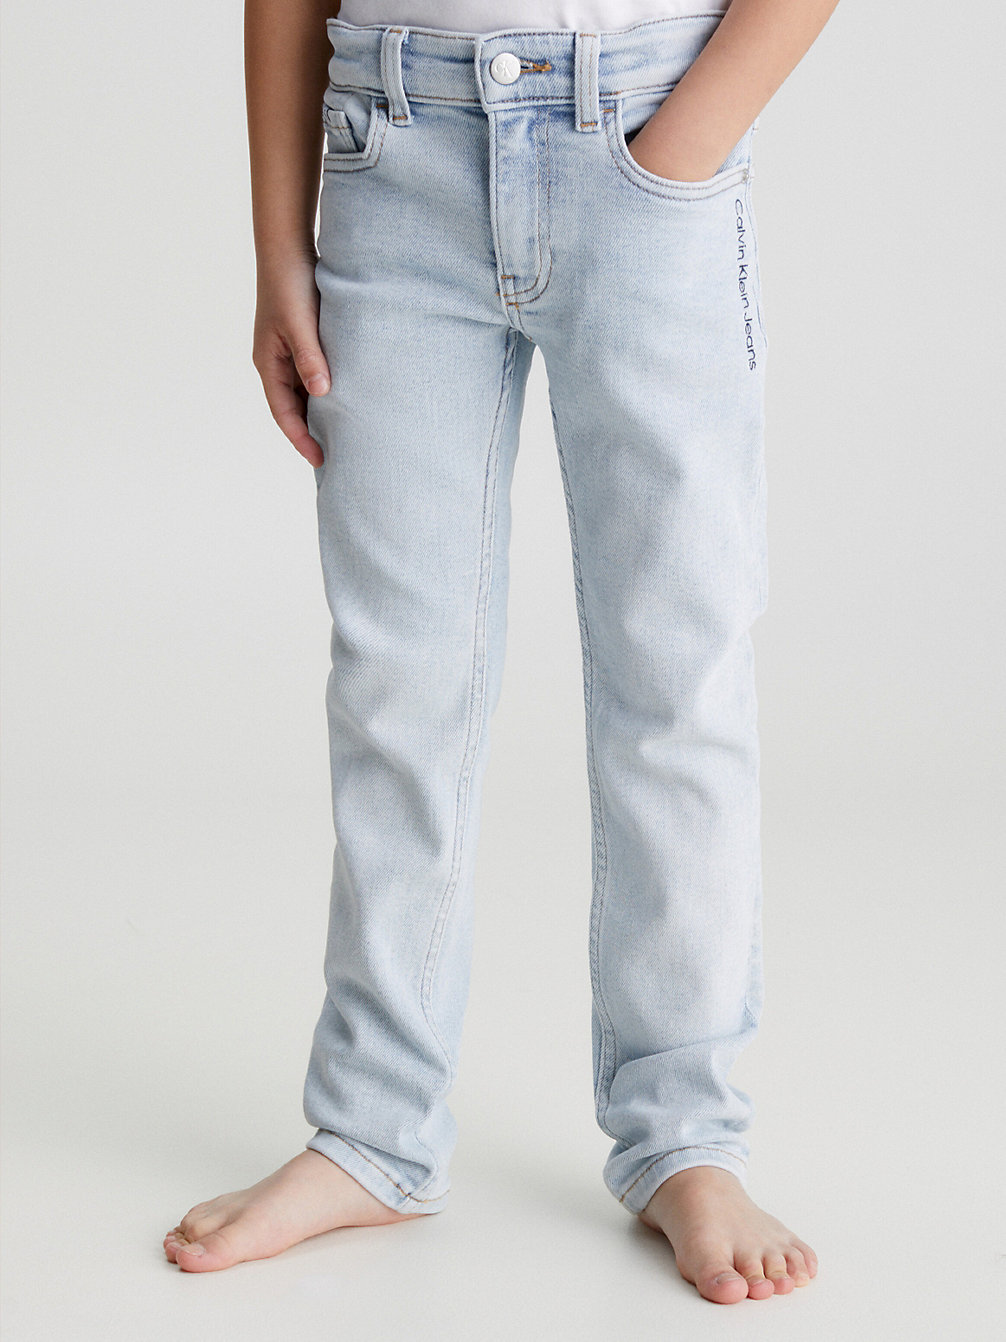 LIGHT BLEACHED STRETCH > Mid Rise Slim Jeans > undefined boys - Calvin Klein